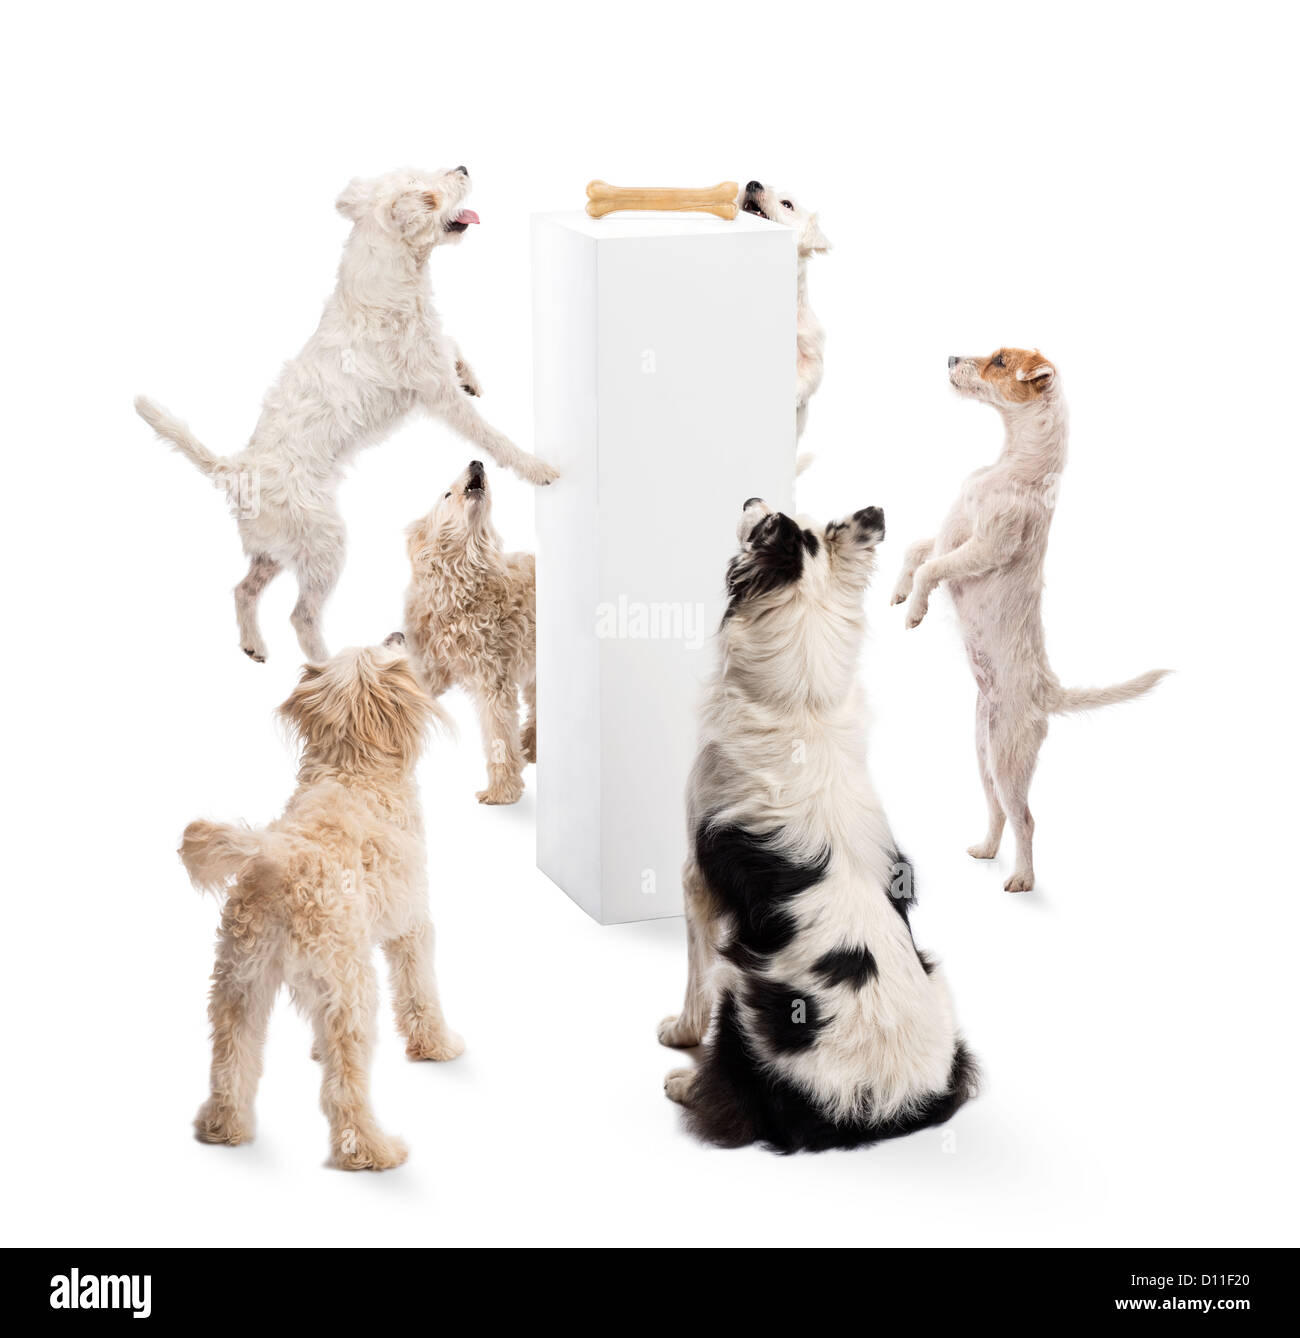 Dogs jumping and looking at bone on pedestal against white background Stock Photo